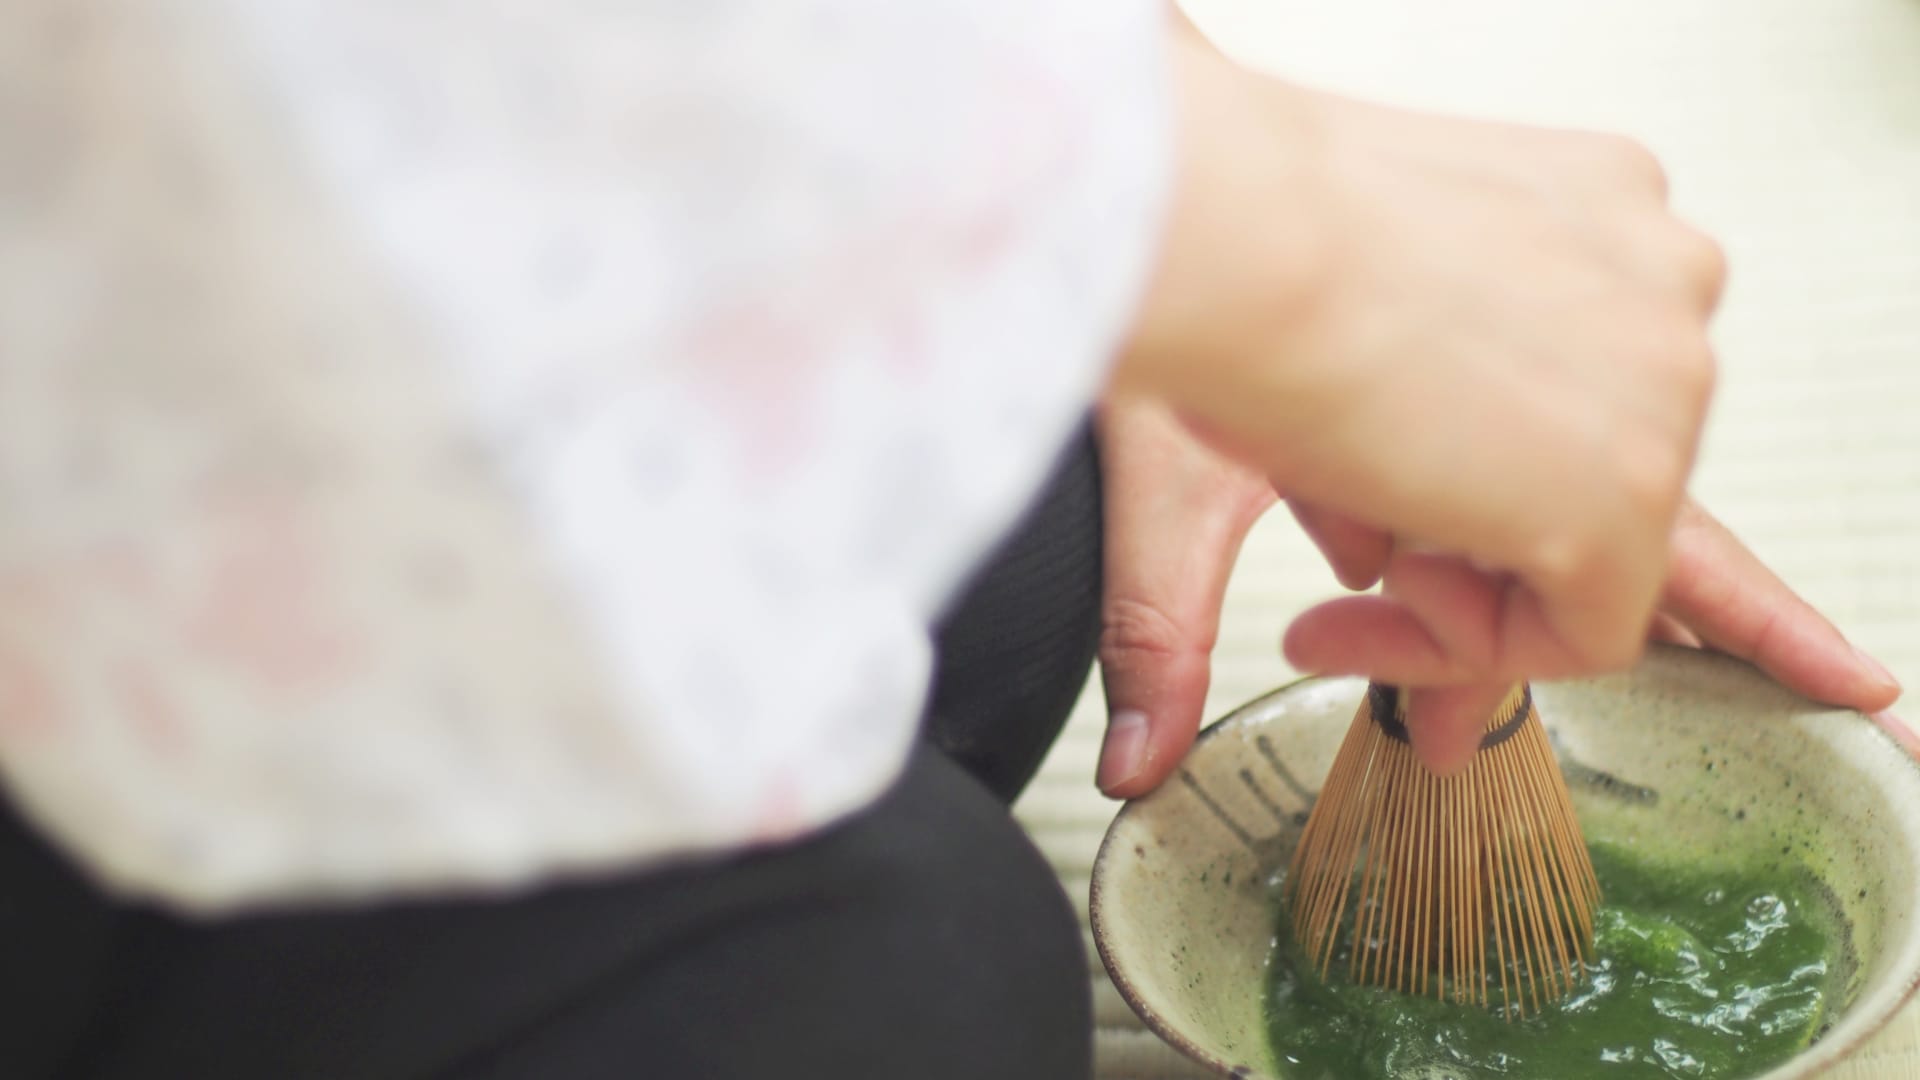 Virtual classes teach viewers how to prepare and drink Japanese matcha at home.